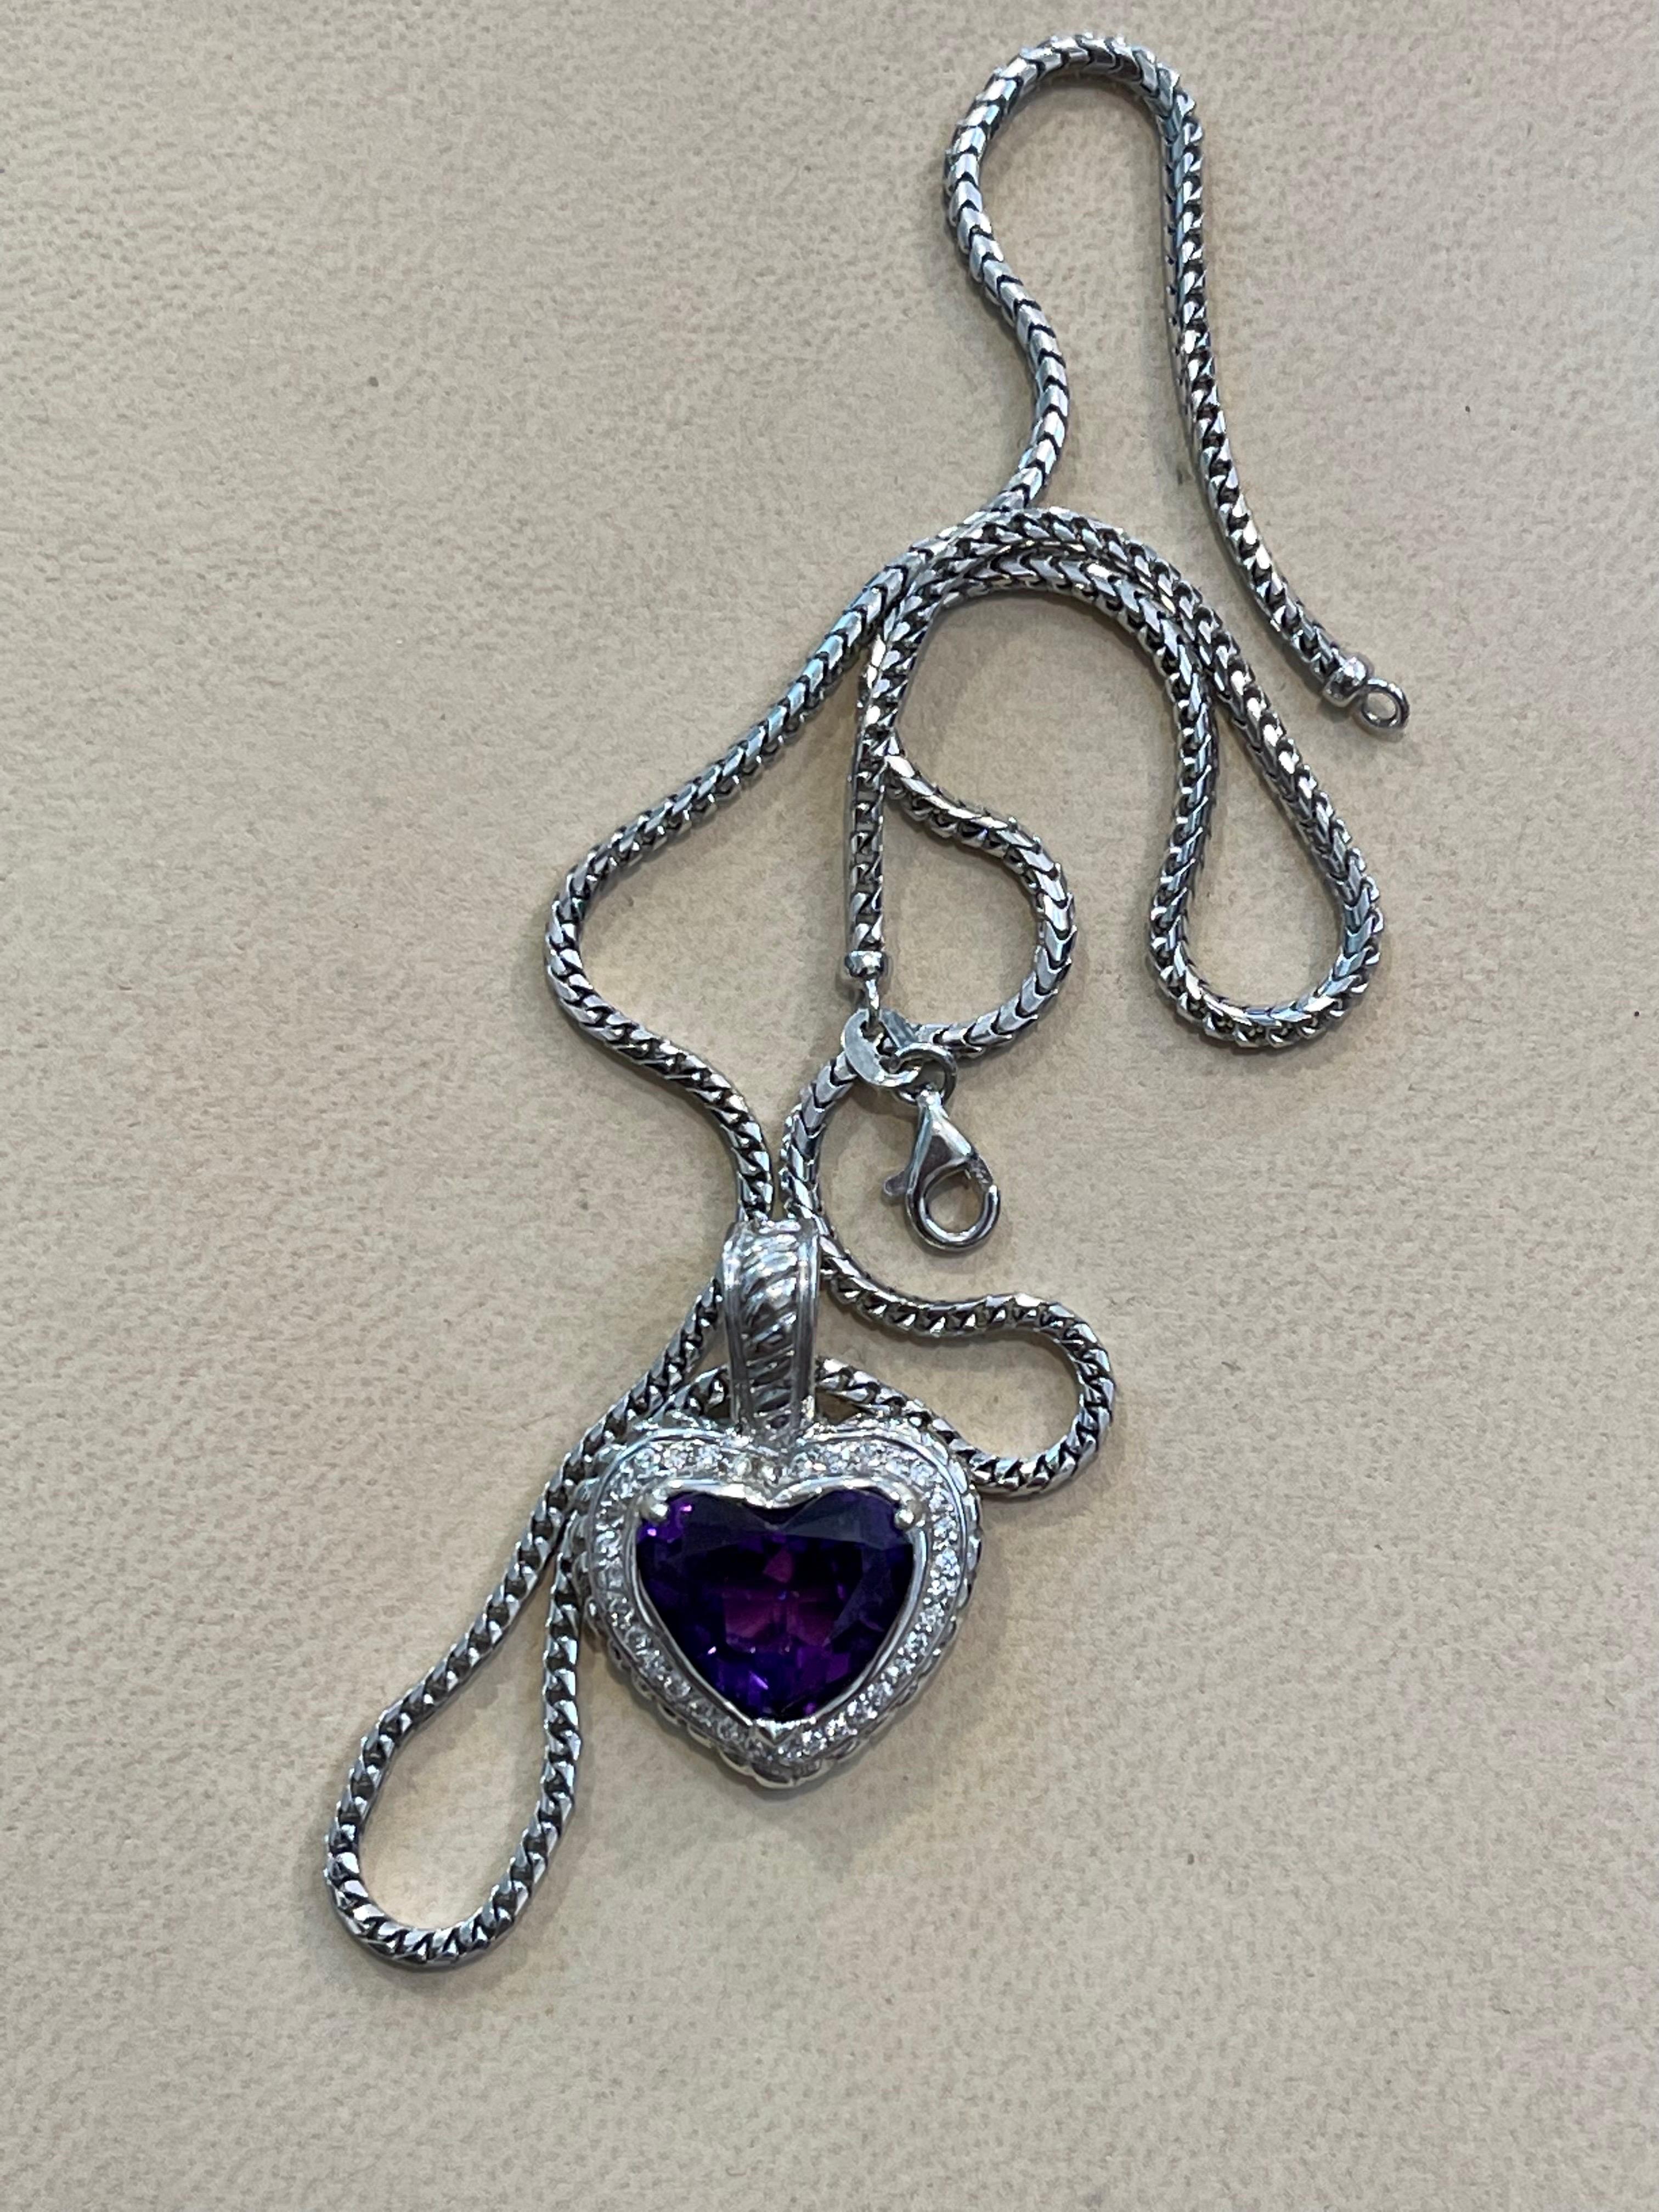 10 Carat Heart Shape Amethyst & 1 Ct Diamond Pendant Necklace 18 Kt White Gold In Excellent Condition In New York, NY